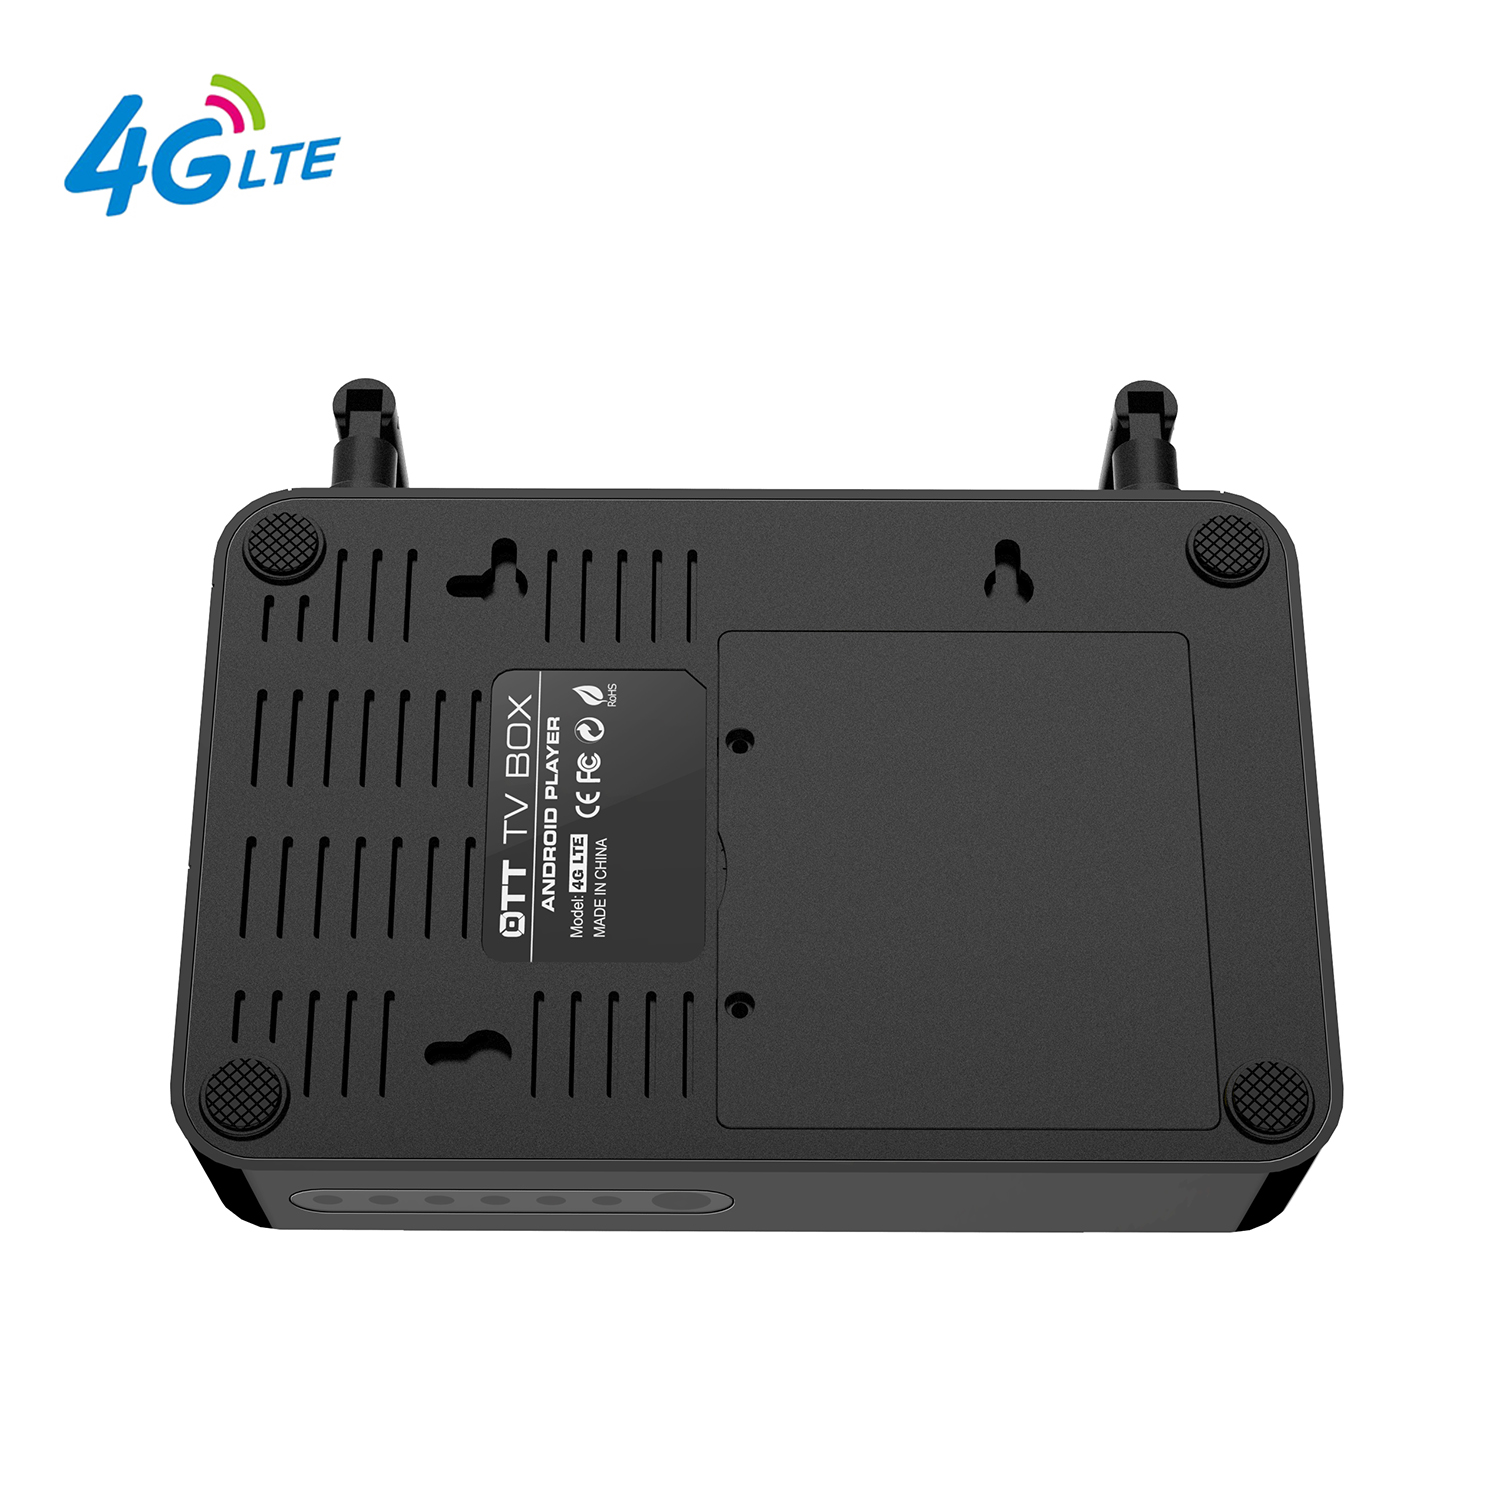 4G LTE Android TV Box